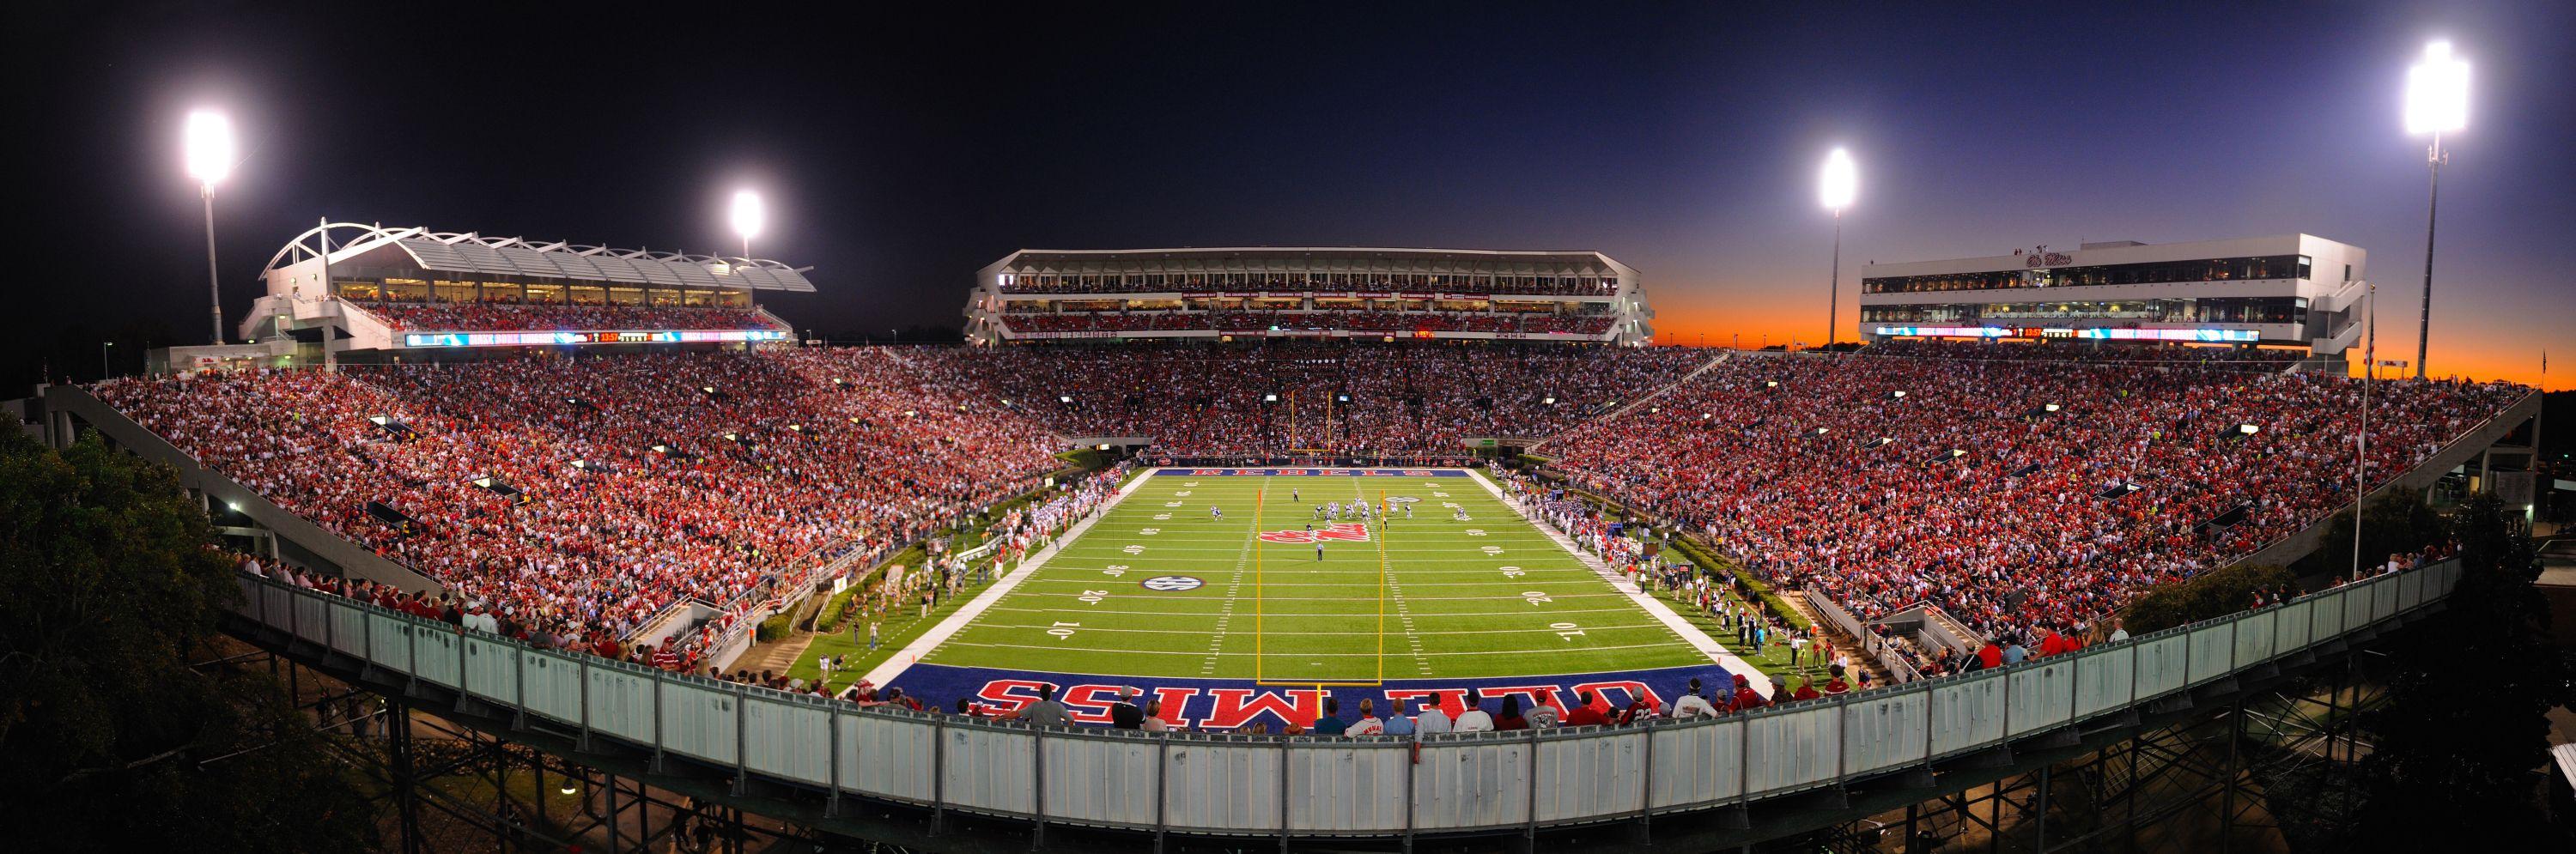 Ole Miss Rebels Football Wallpapers - Wallpaper Cave